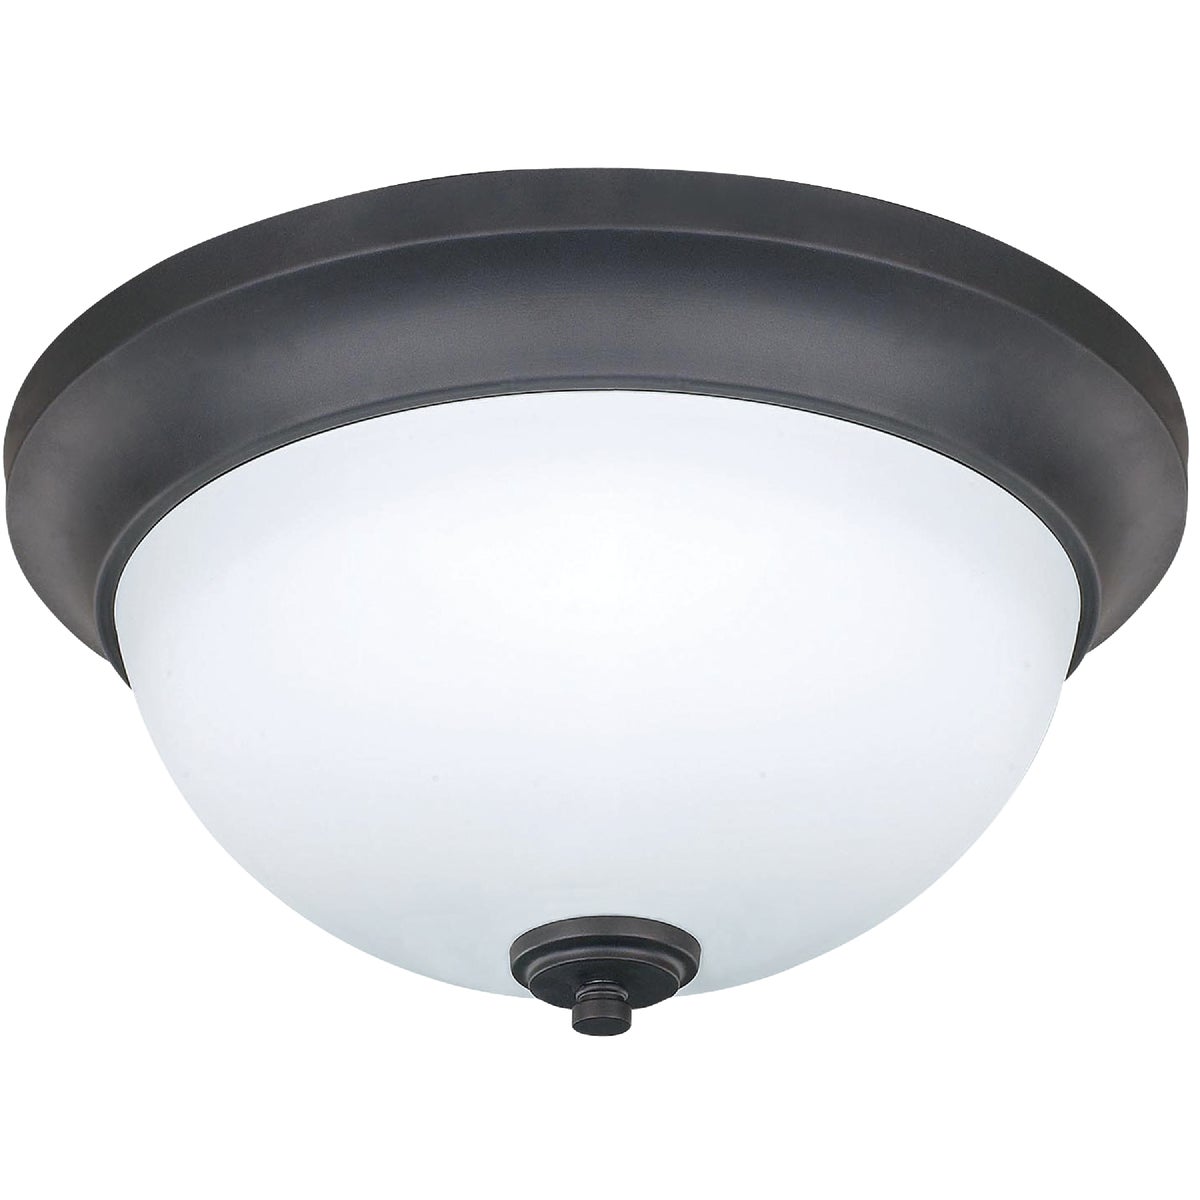 Home Impressions New Yorker 13 In. Oil-Rubbed Bronze Incandescent Flush Mount Ceiling Light Fixture